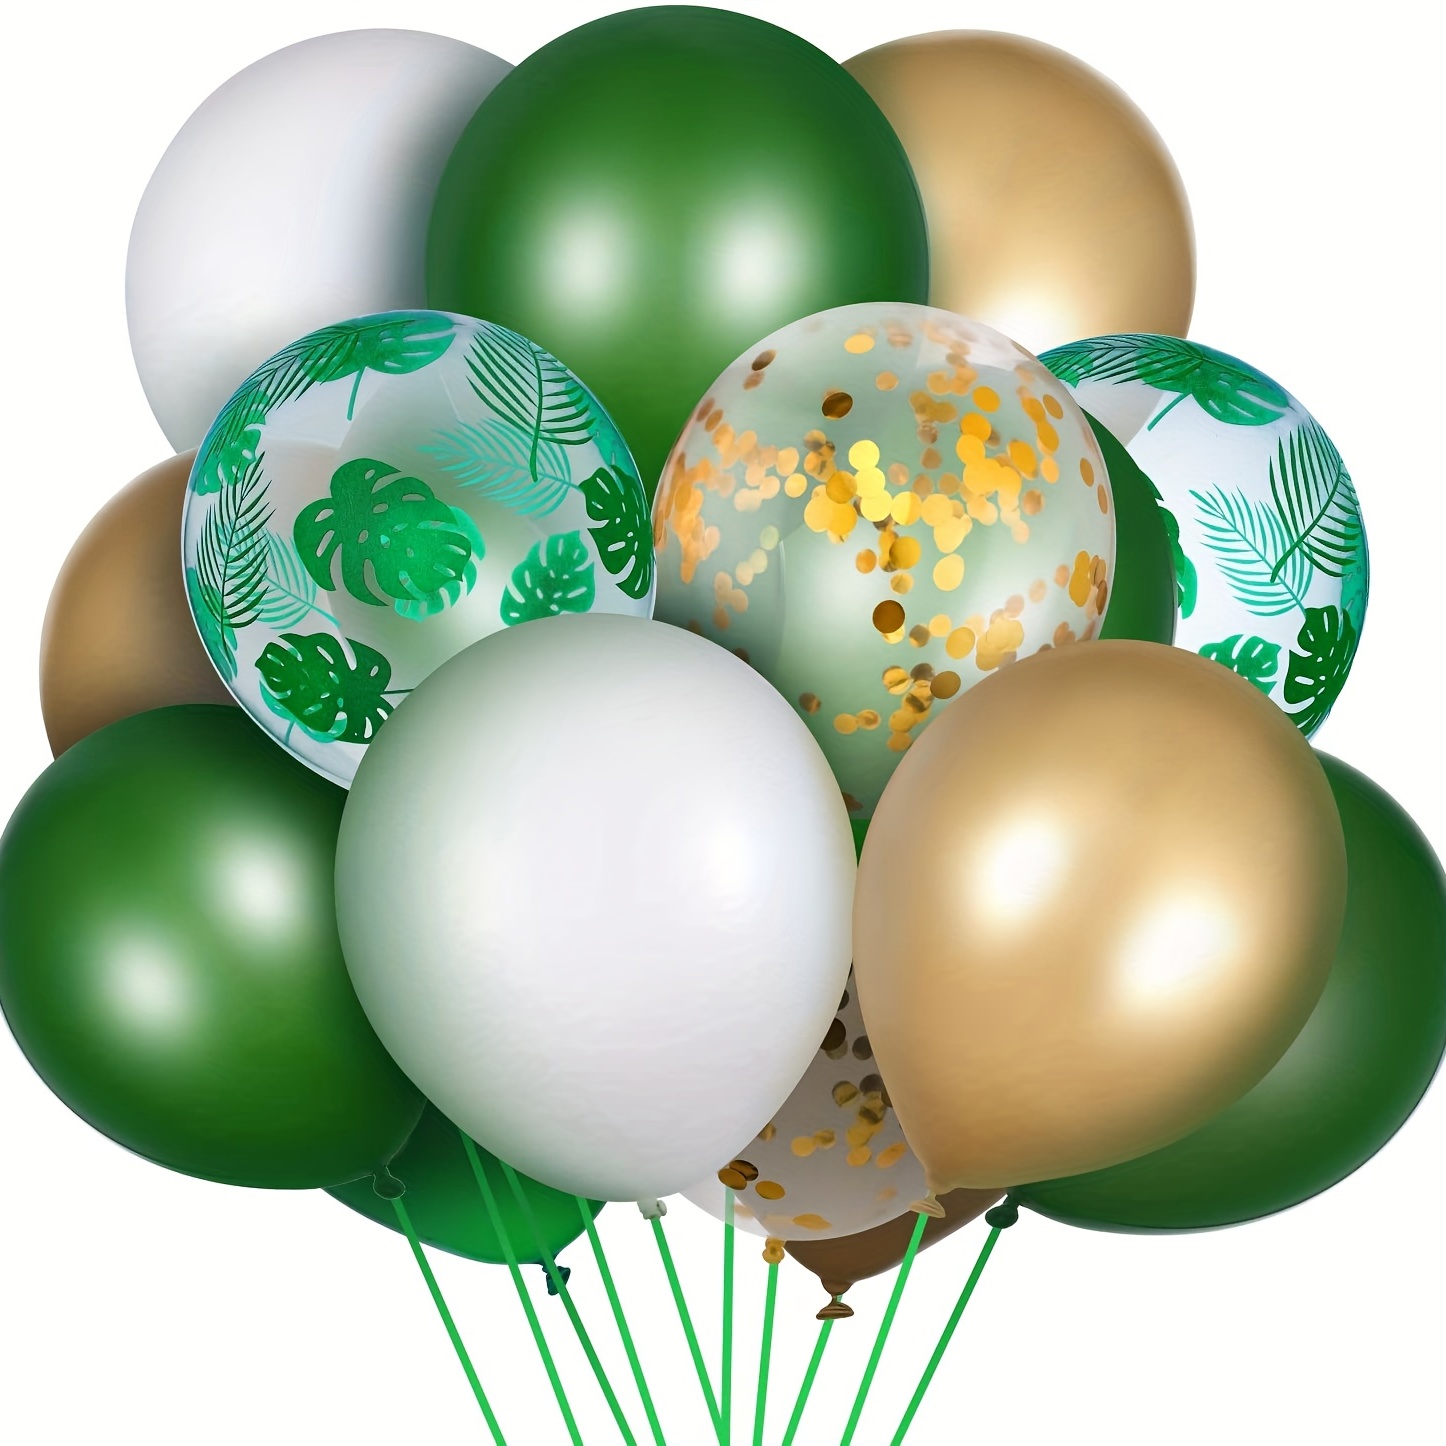 

50pcs, 10inch 12inch Jungle Safari Theme Balloons Green White Latex Palm Leaves Confetti Balloons With Balloon Hawaiian Party Summer Party Arch Kit For Jungle Safari Birthday Shower Decorations